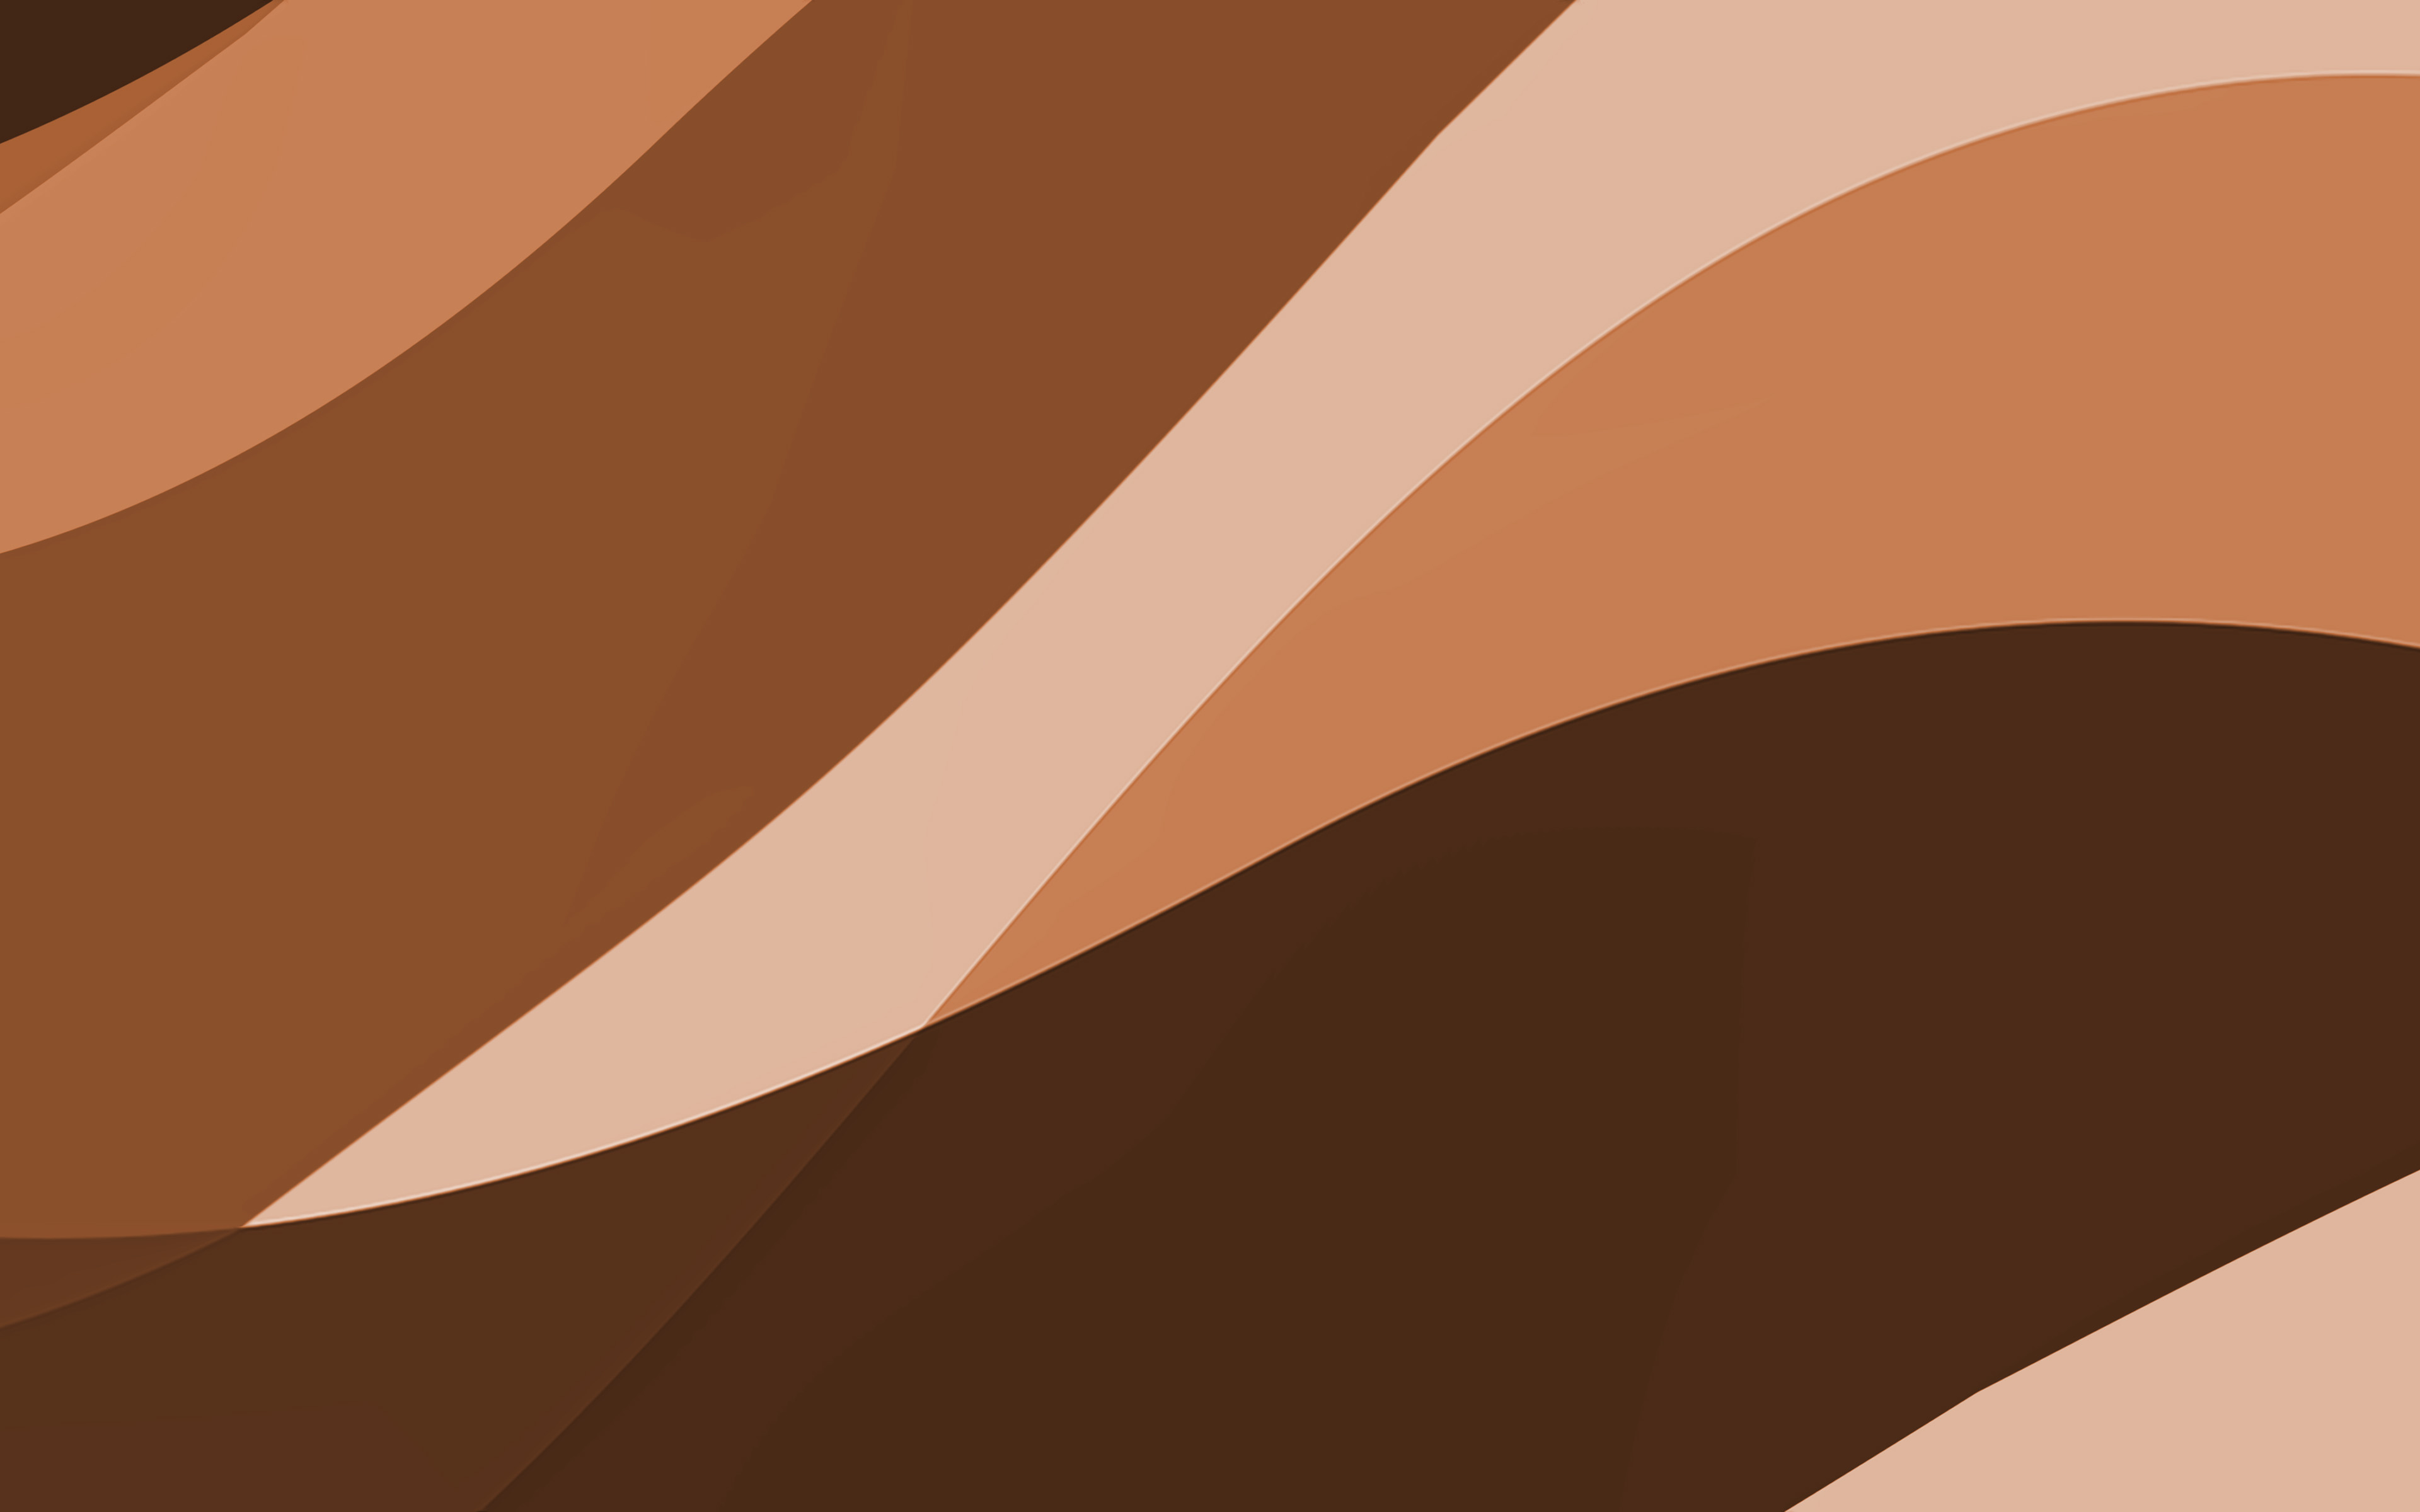 Download wallpaper brown abstract waves, 4k, minimal, brown wavy background, material design, abstract waves, brown background, creative, waves patterns for desktop with resolution 3840x2400. High Quality HD picture wallpaper